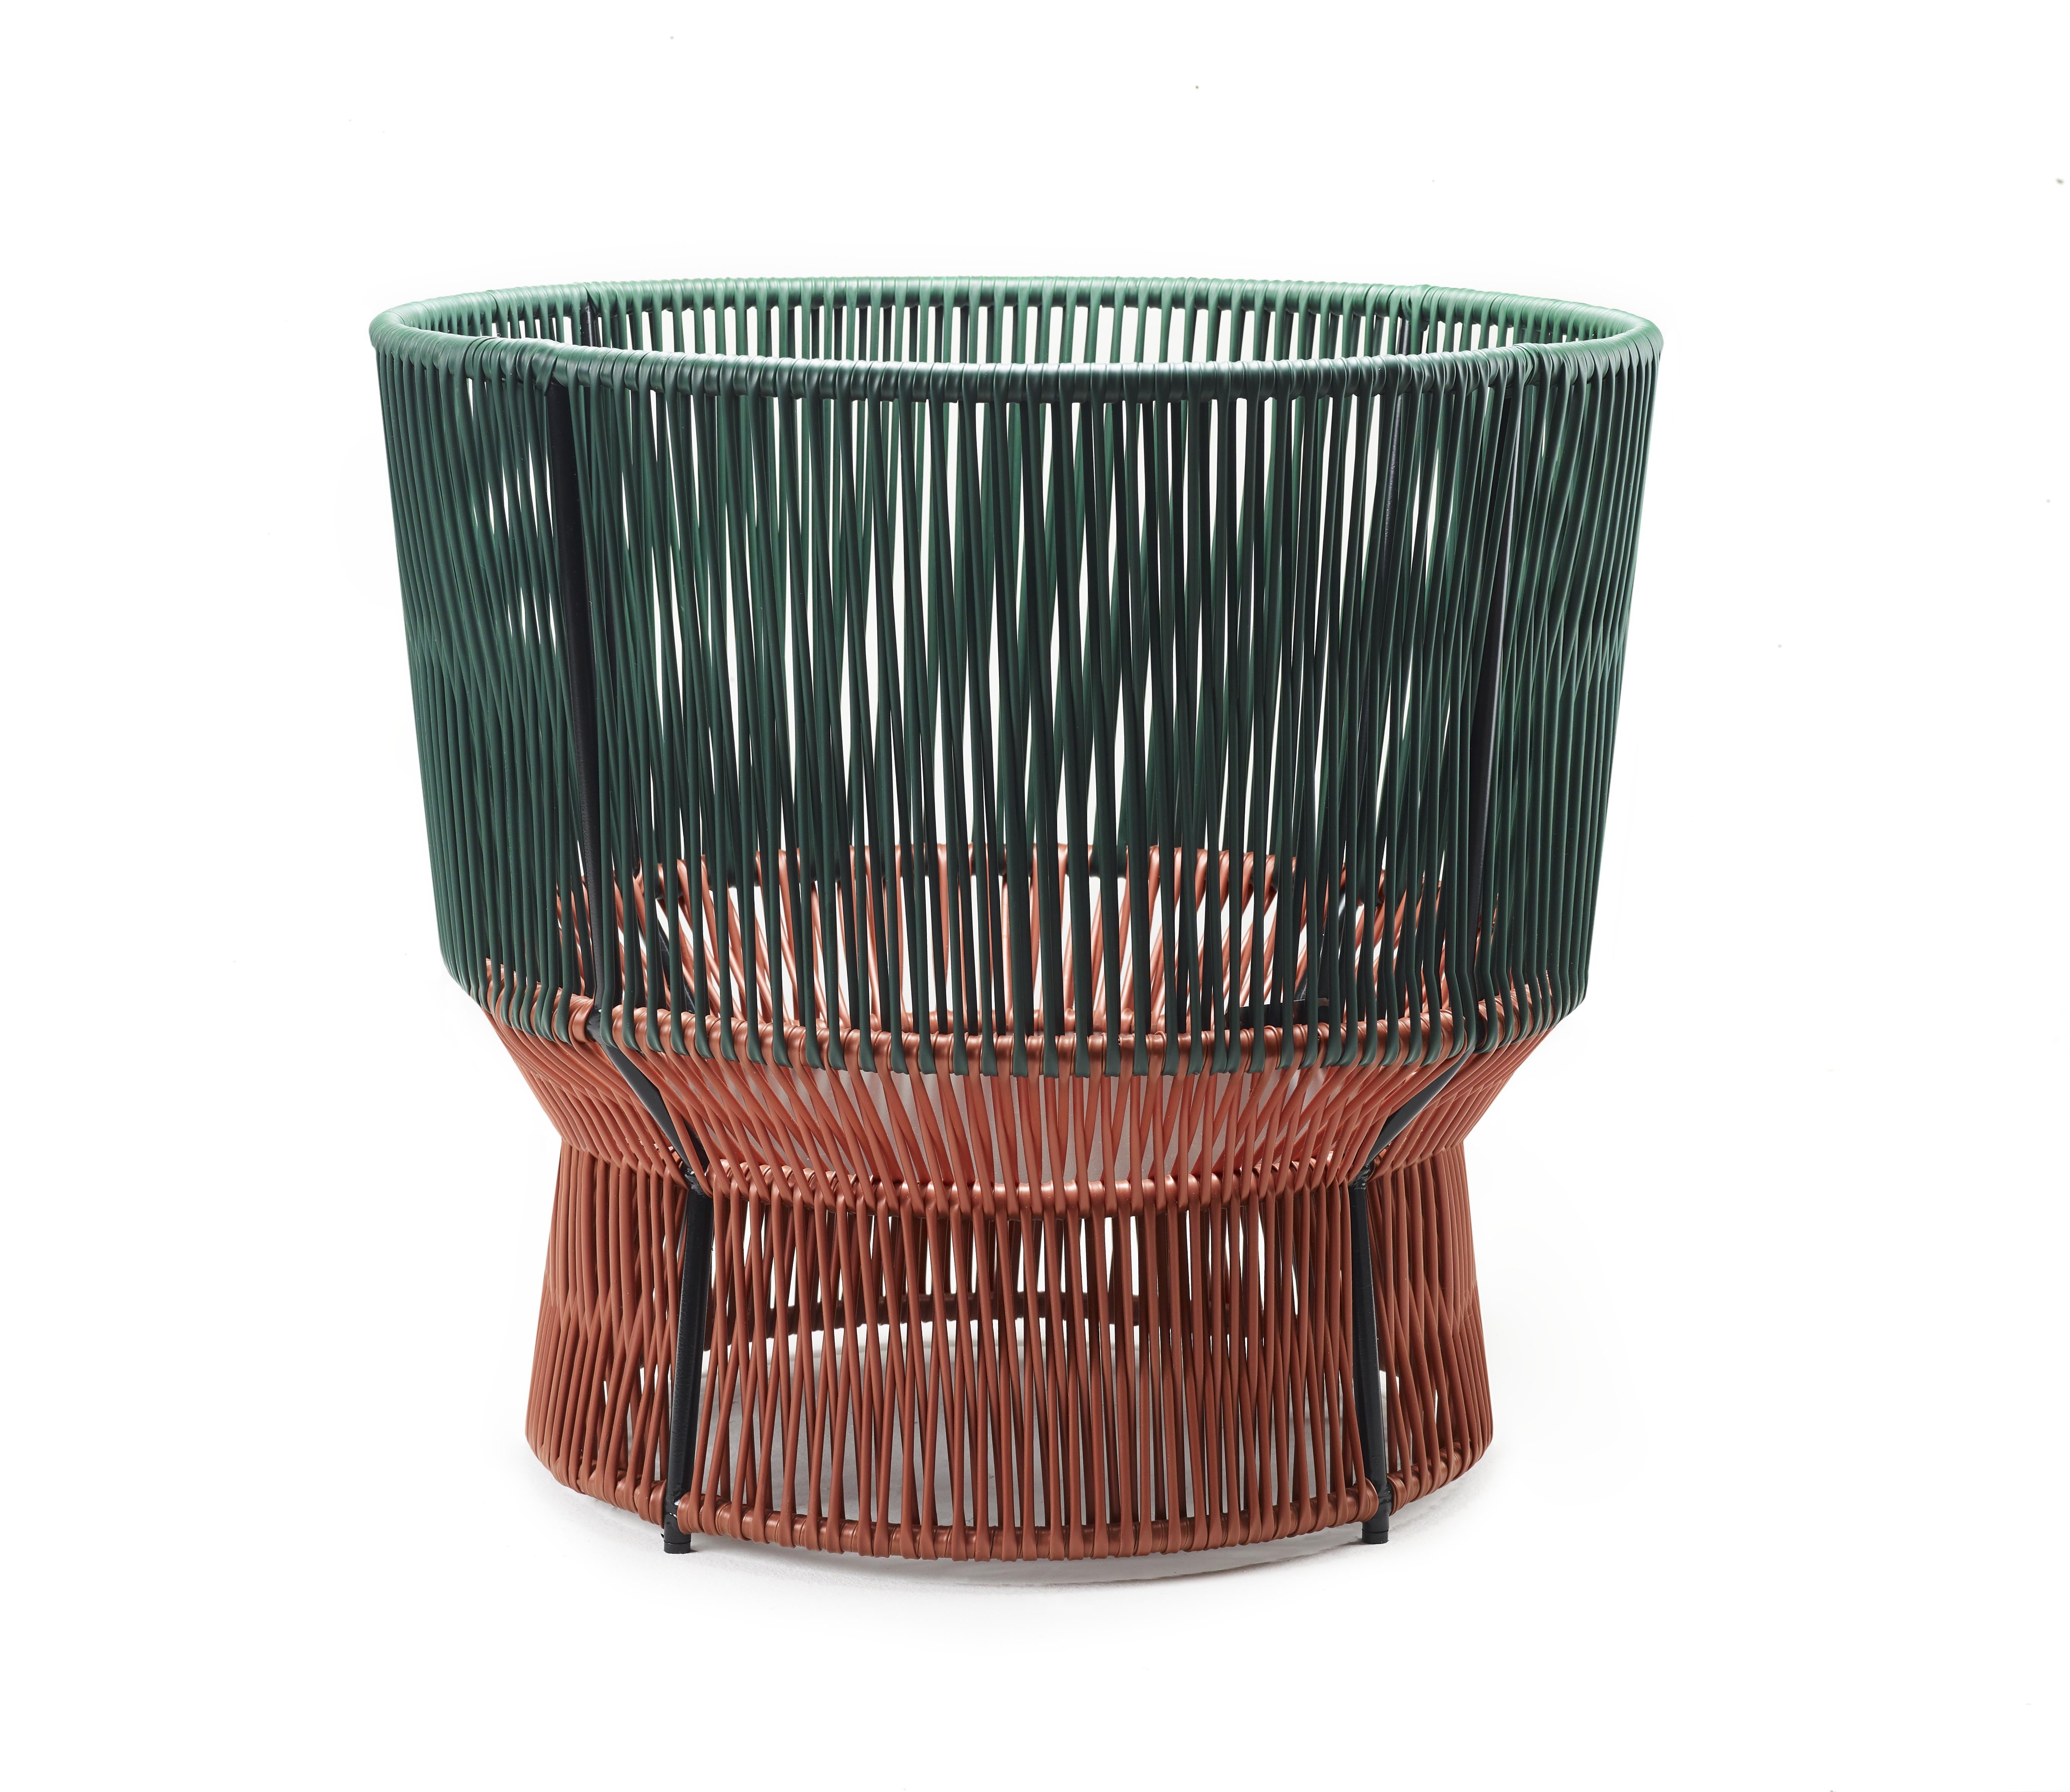 Small caribe chic basket 1 by Sebastian Herkner
Materials: Galvanized and powder-coated tubular steel. PVC strings are made from recycled plastic.
Technique: Made from recycled plastic and weaved by local craftspeople in Colombia. 
Dimensions: W